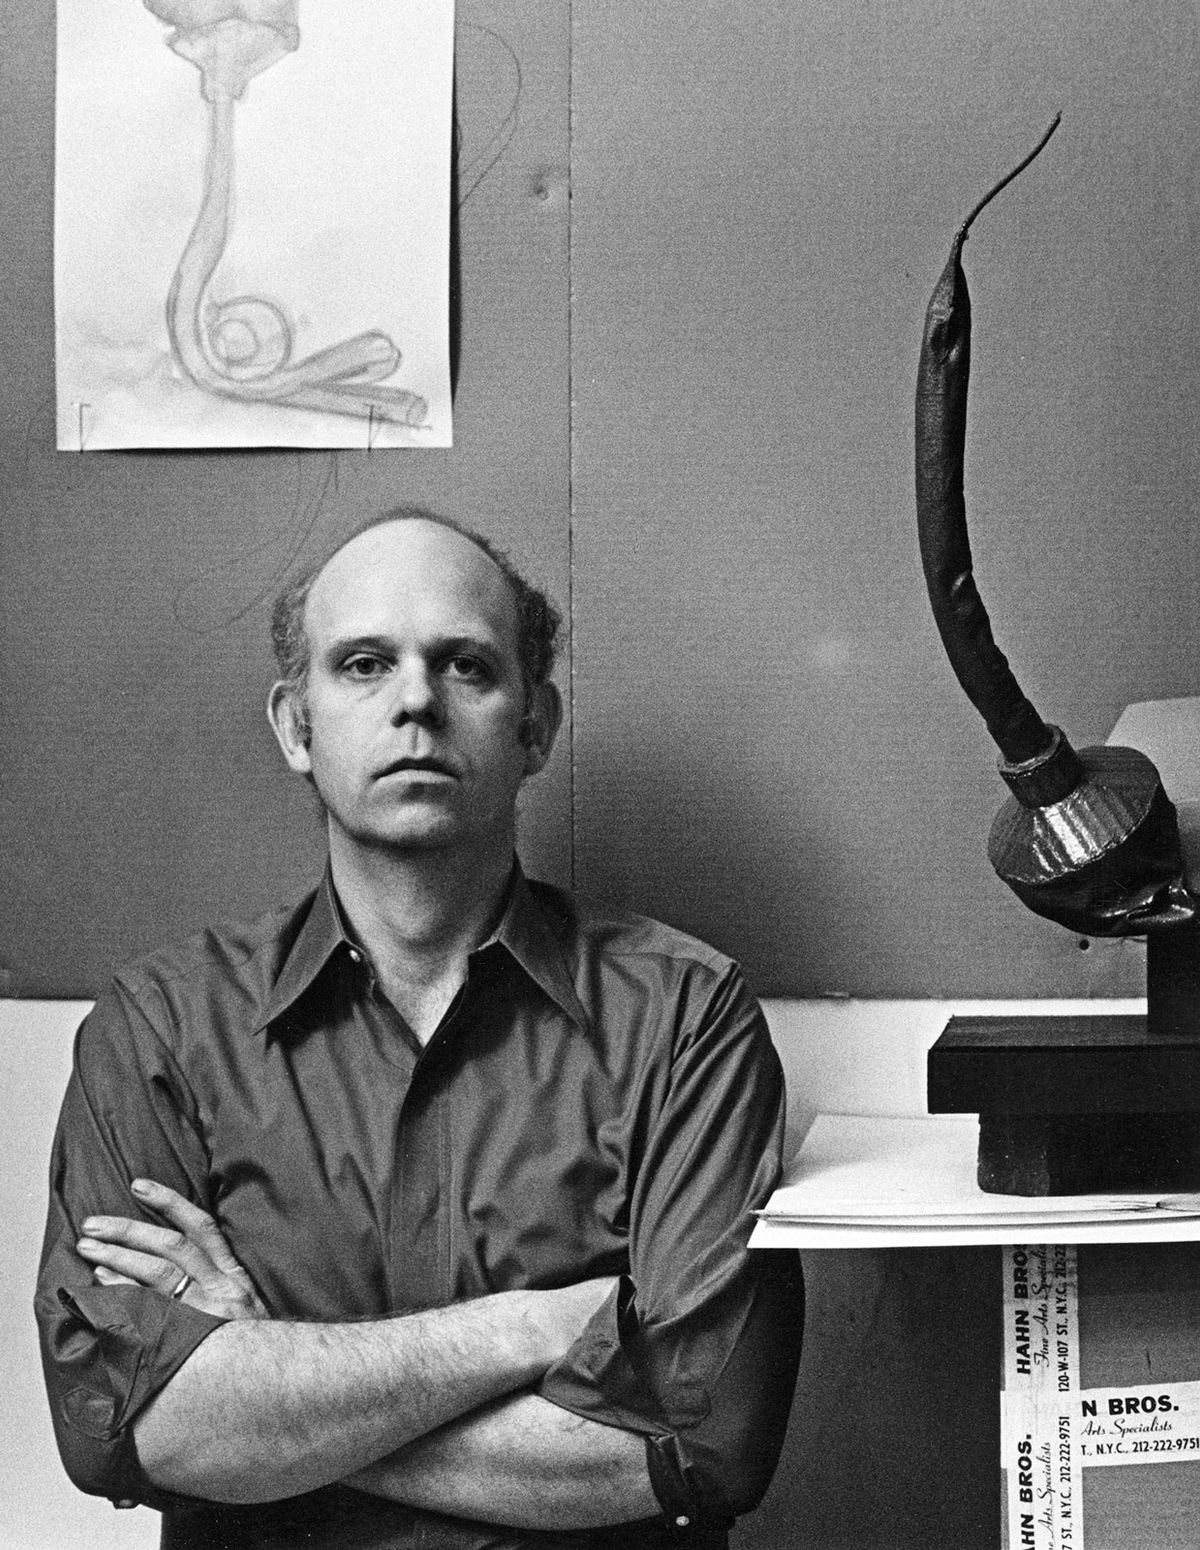 Oldenburg, pictured in 1970, was a significant figure in 20th-century art whose work celebrated “form” Photo: Jack Mitchell/Getty Images